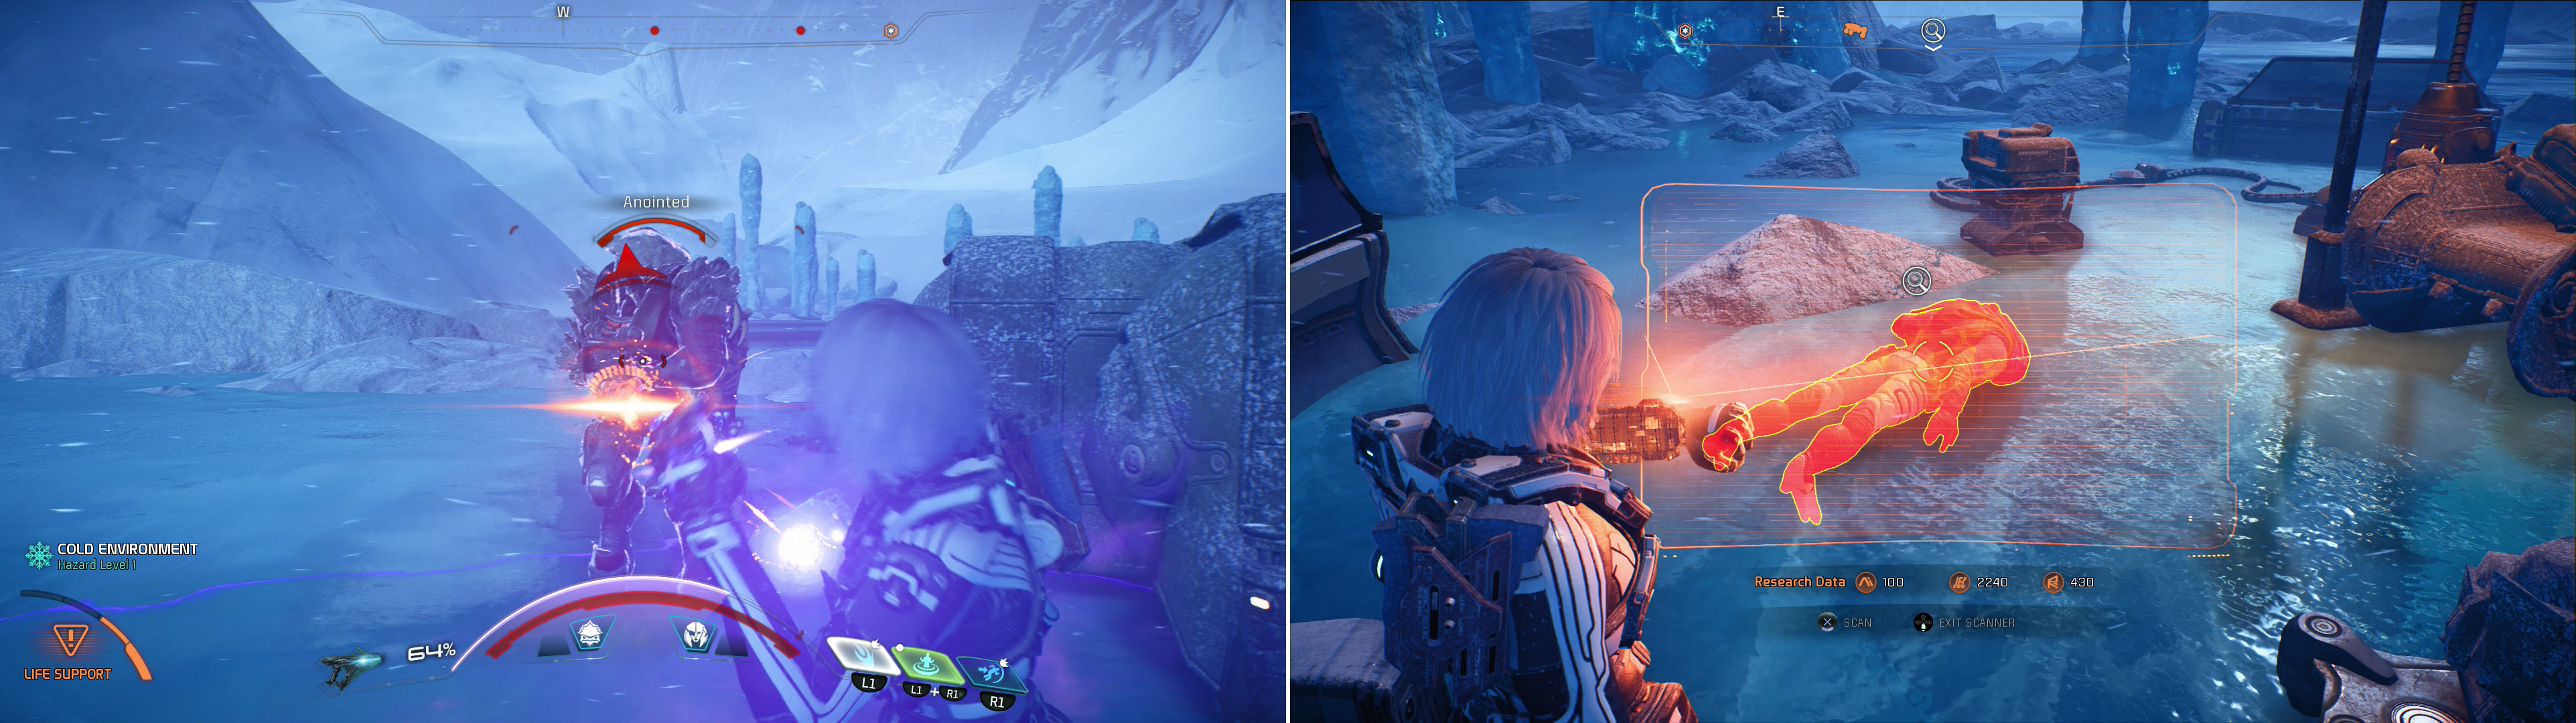 As you explore Voeld, raid unmarked Kett camps (left) and with luck youll find randomly spawning Angaran corpses you can scan (right).